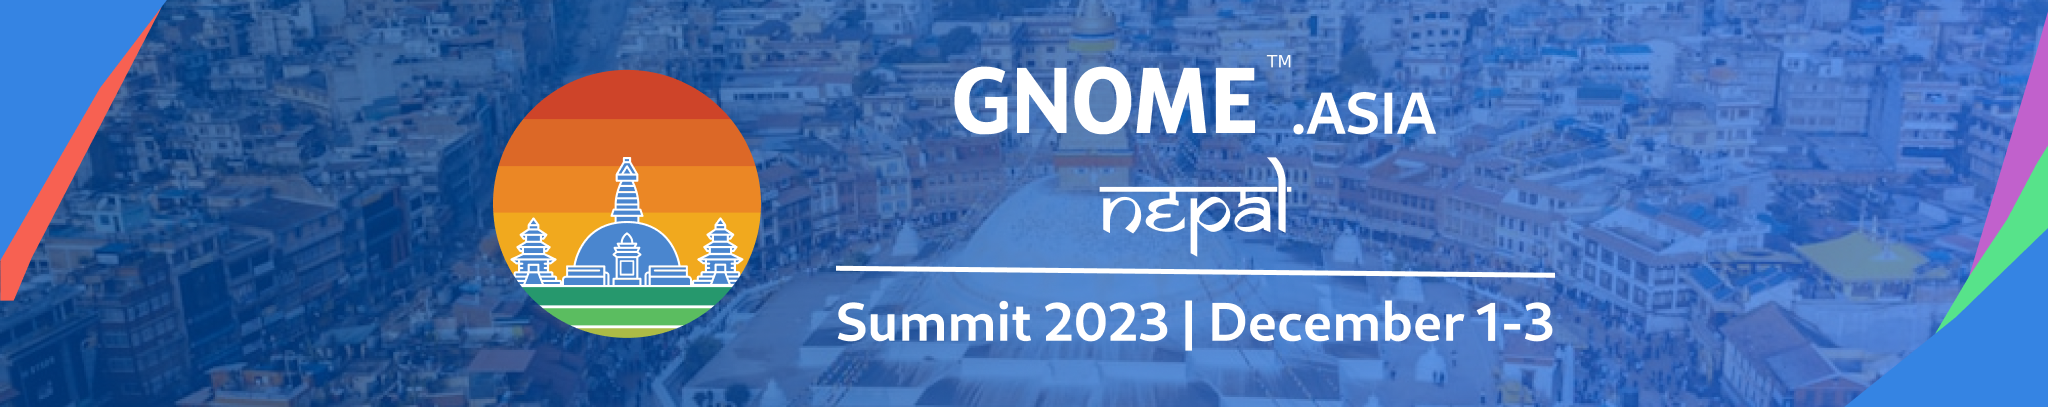 You are currently viewing GNOME.Asia 2023 will be held in Kathmandu, Nepal